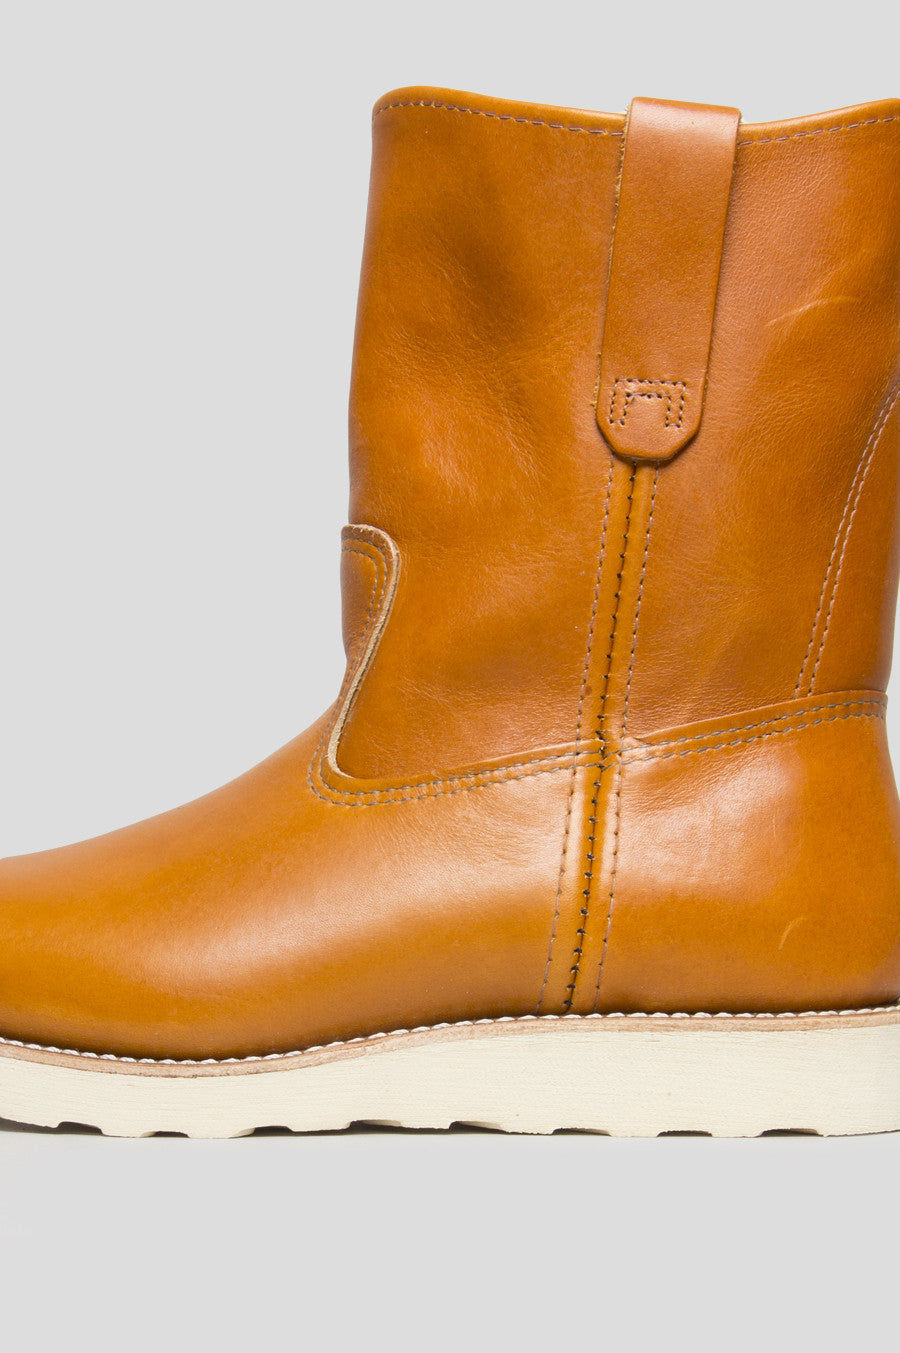 RED WING 9" PECOS GOLD RUSSET - BLENDS